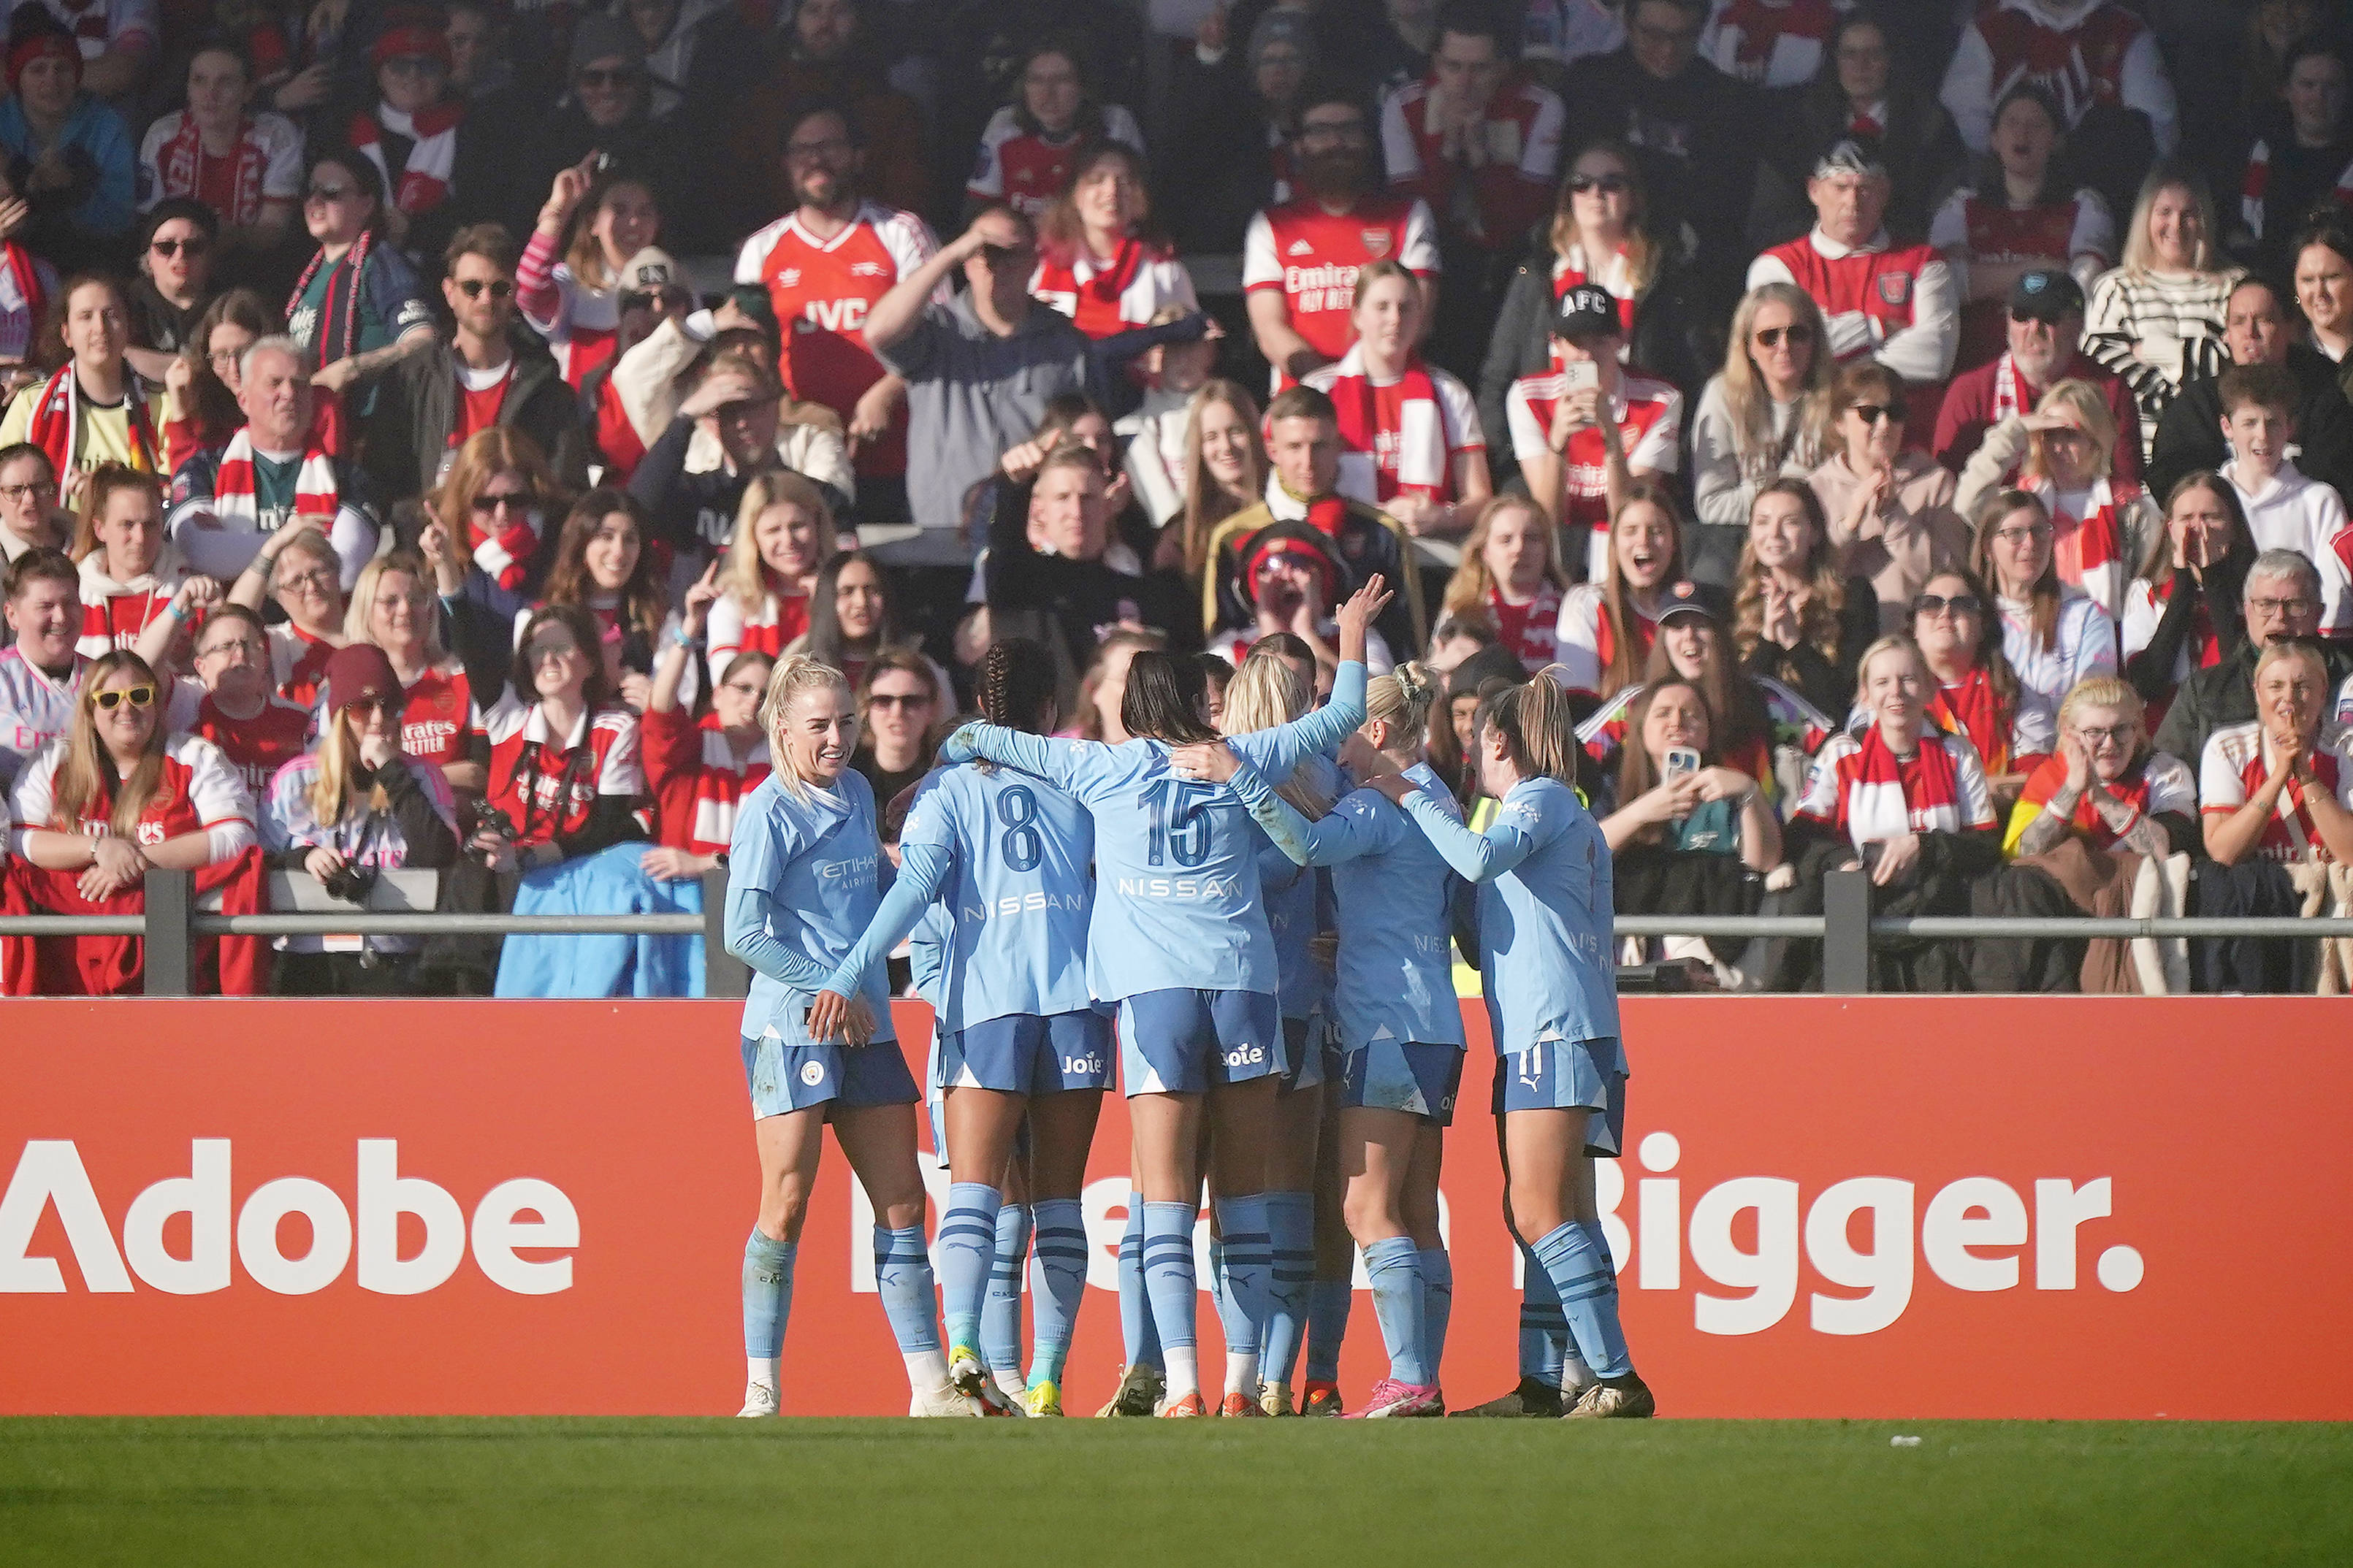 Manchester City s Laia Aleixandri (hidden) celebrates with teammates after scoring the opening goal of the game during the Adobe WFA Cup fifth round match at the Mangata Pay UK Stadium, Borehamwood.